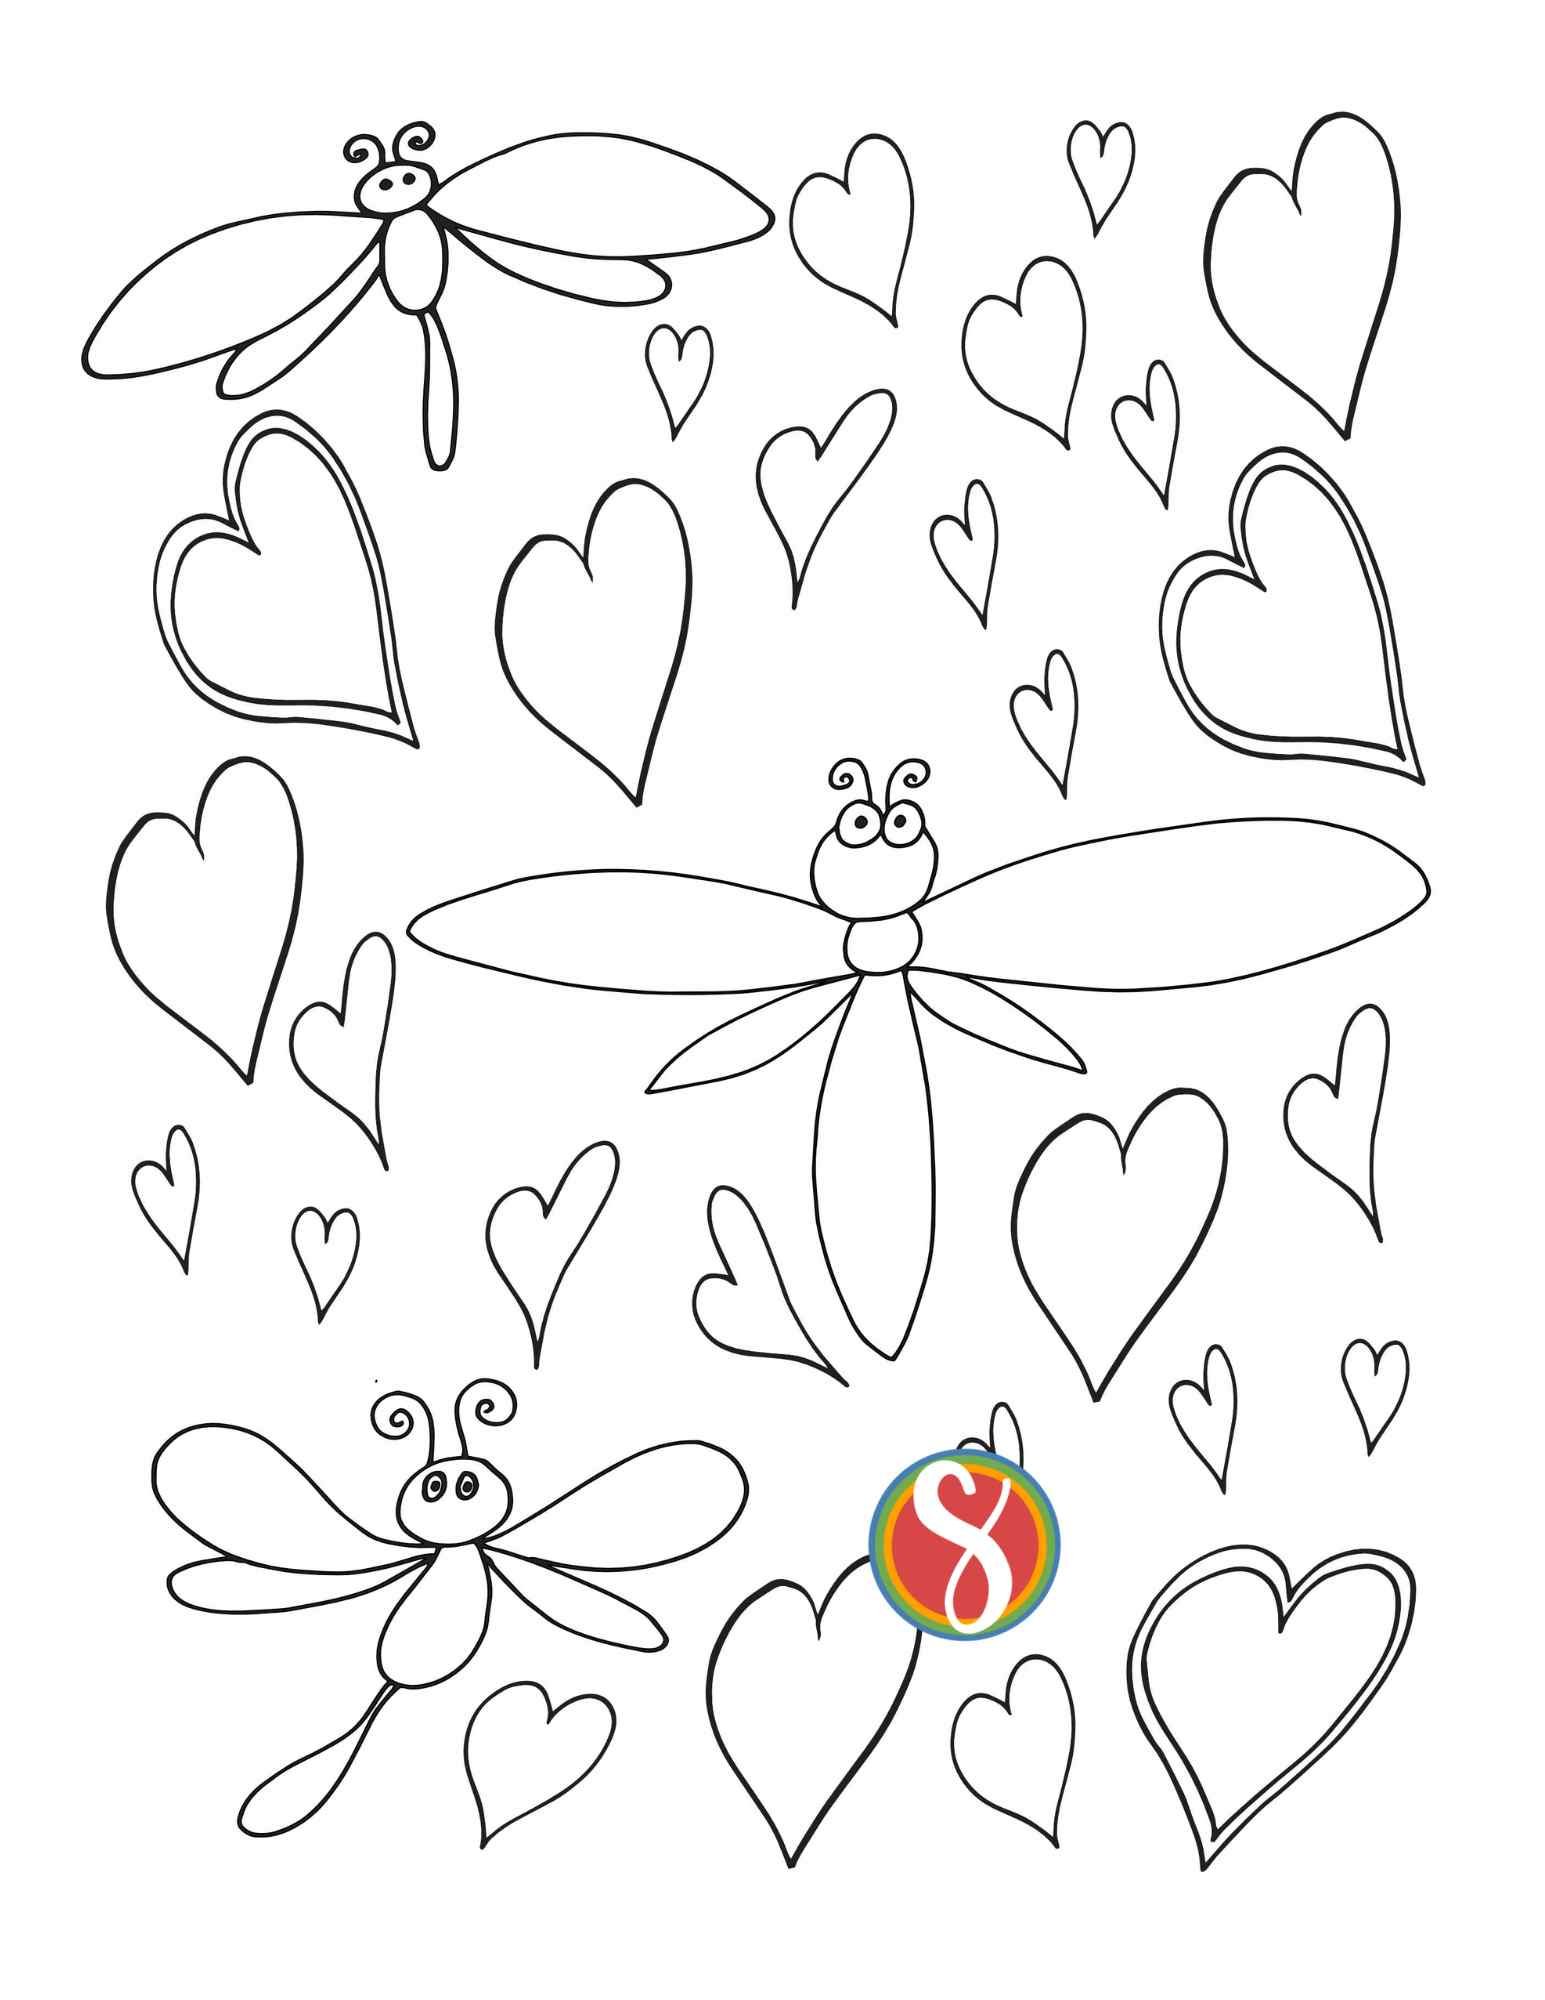 different sizes of hearts and dragonflies  coloring page